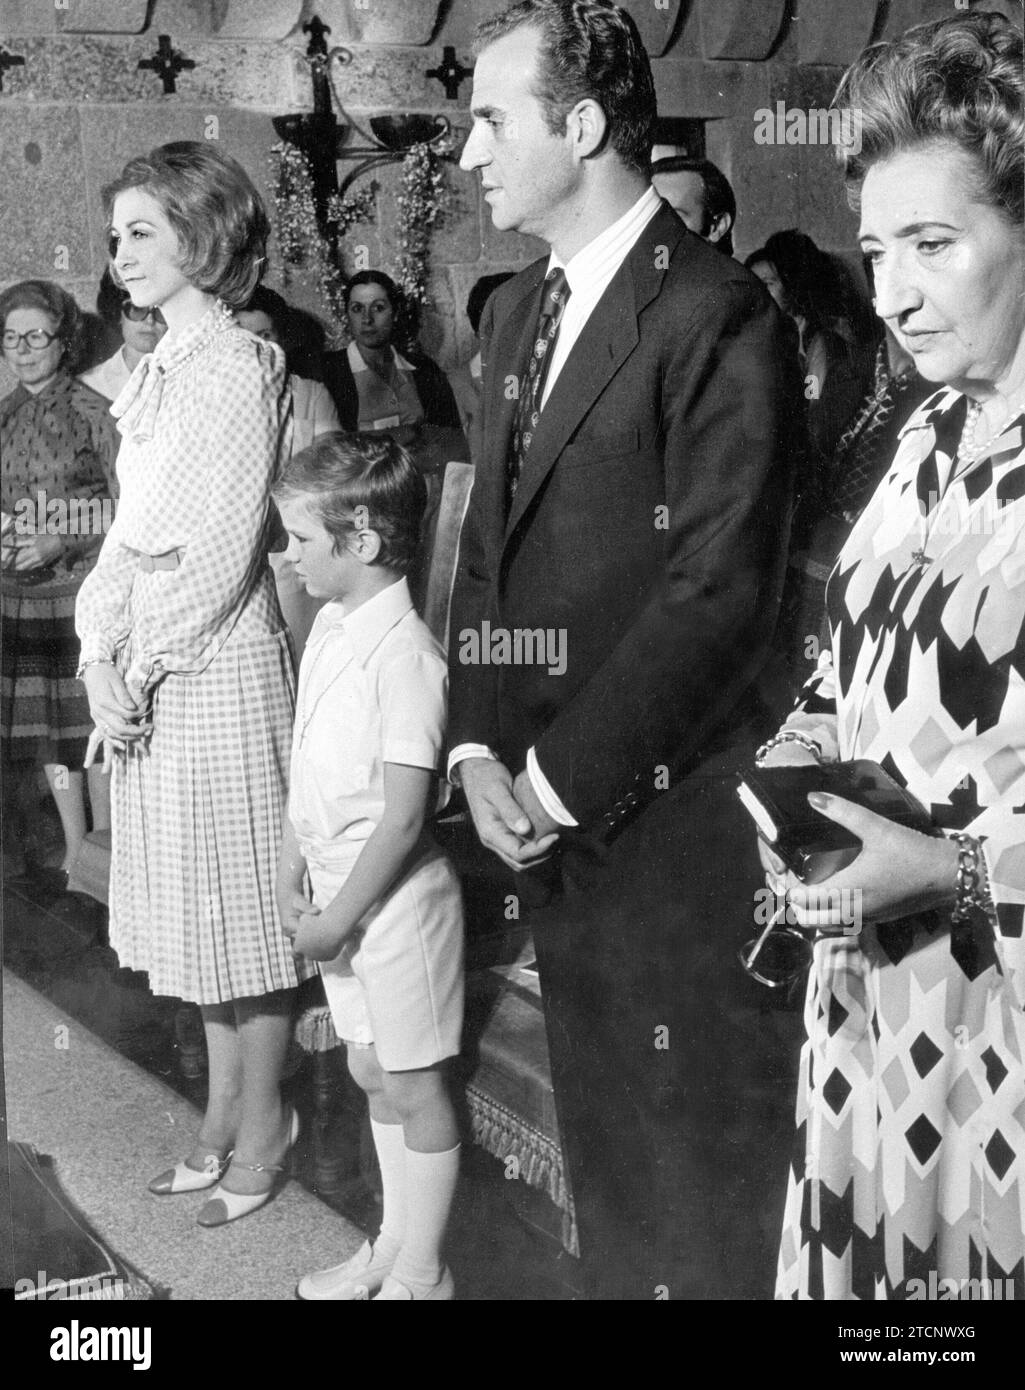 05/29/1975. The Infante Don Felipe with his Parents the Princes of Spain and his grandmother HRH the Countess of Barcelona on the day of his first Communion. Credit: Album / Archivo ABC / Ángel Carchenilla Stock Photo